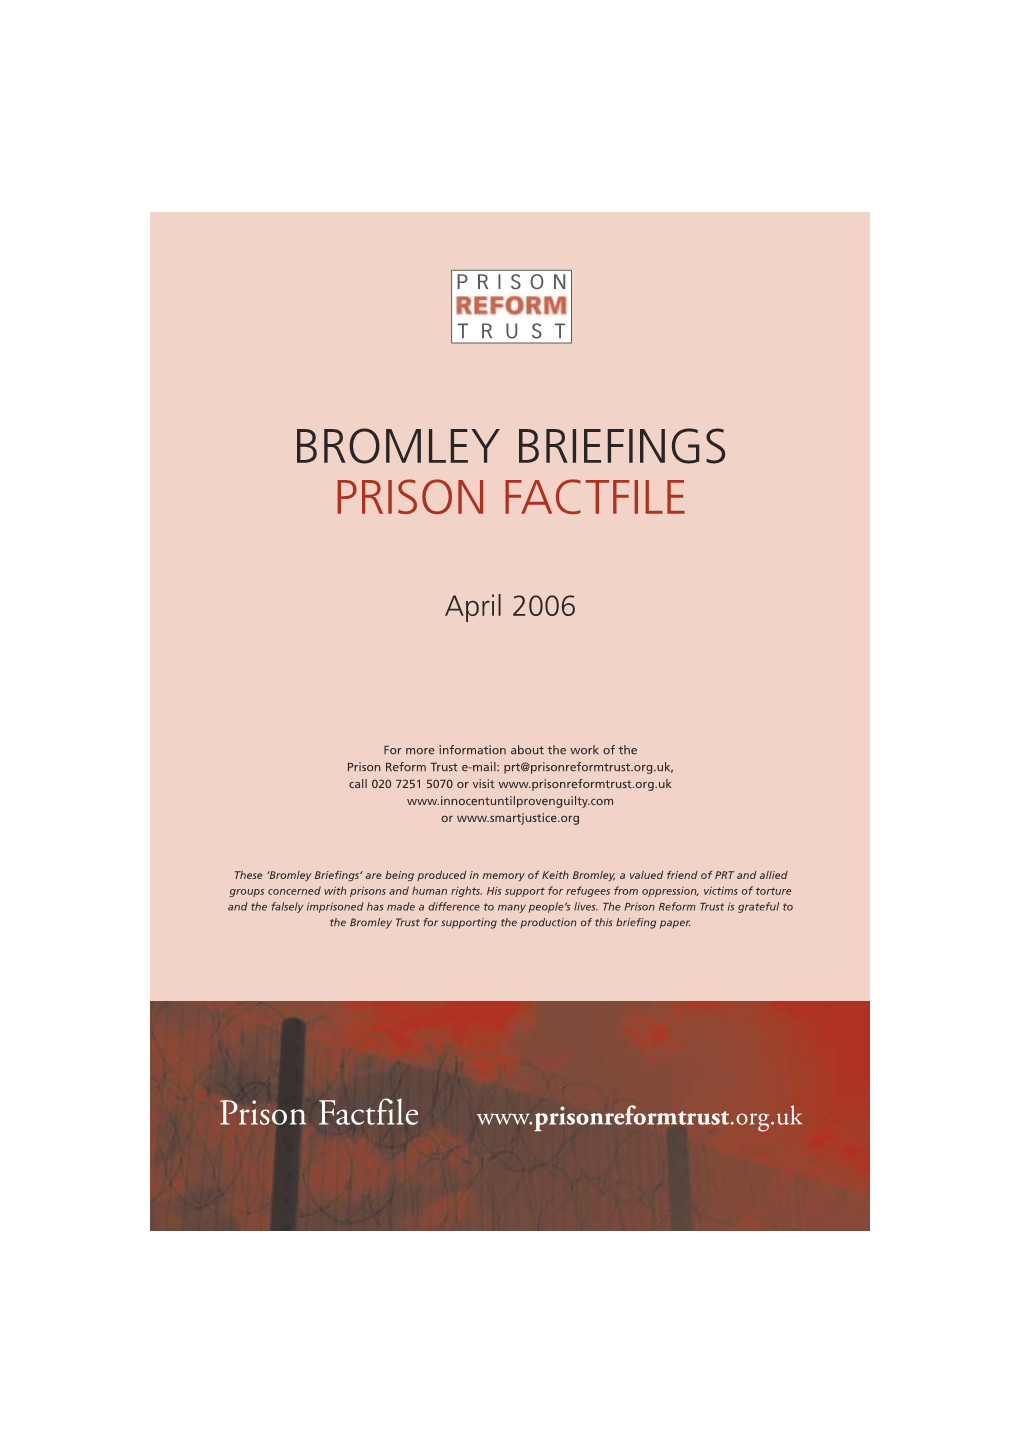 Bromley Briefings Prison Factfile